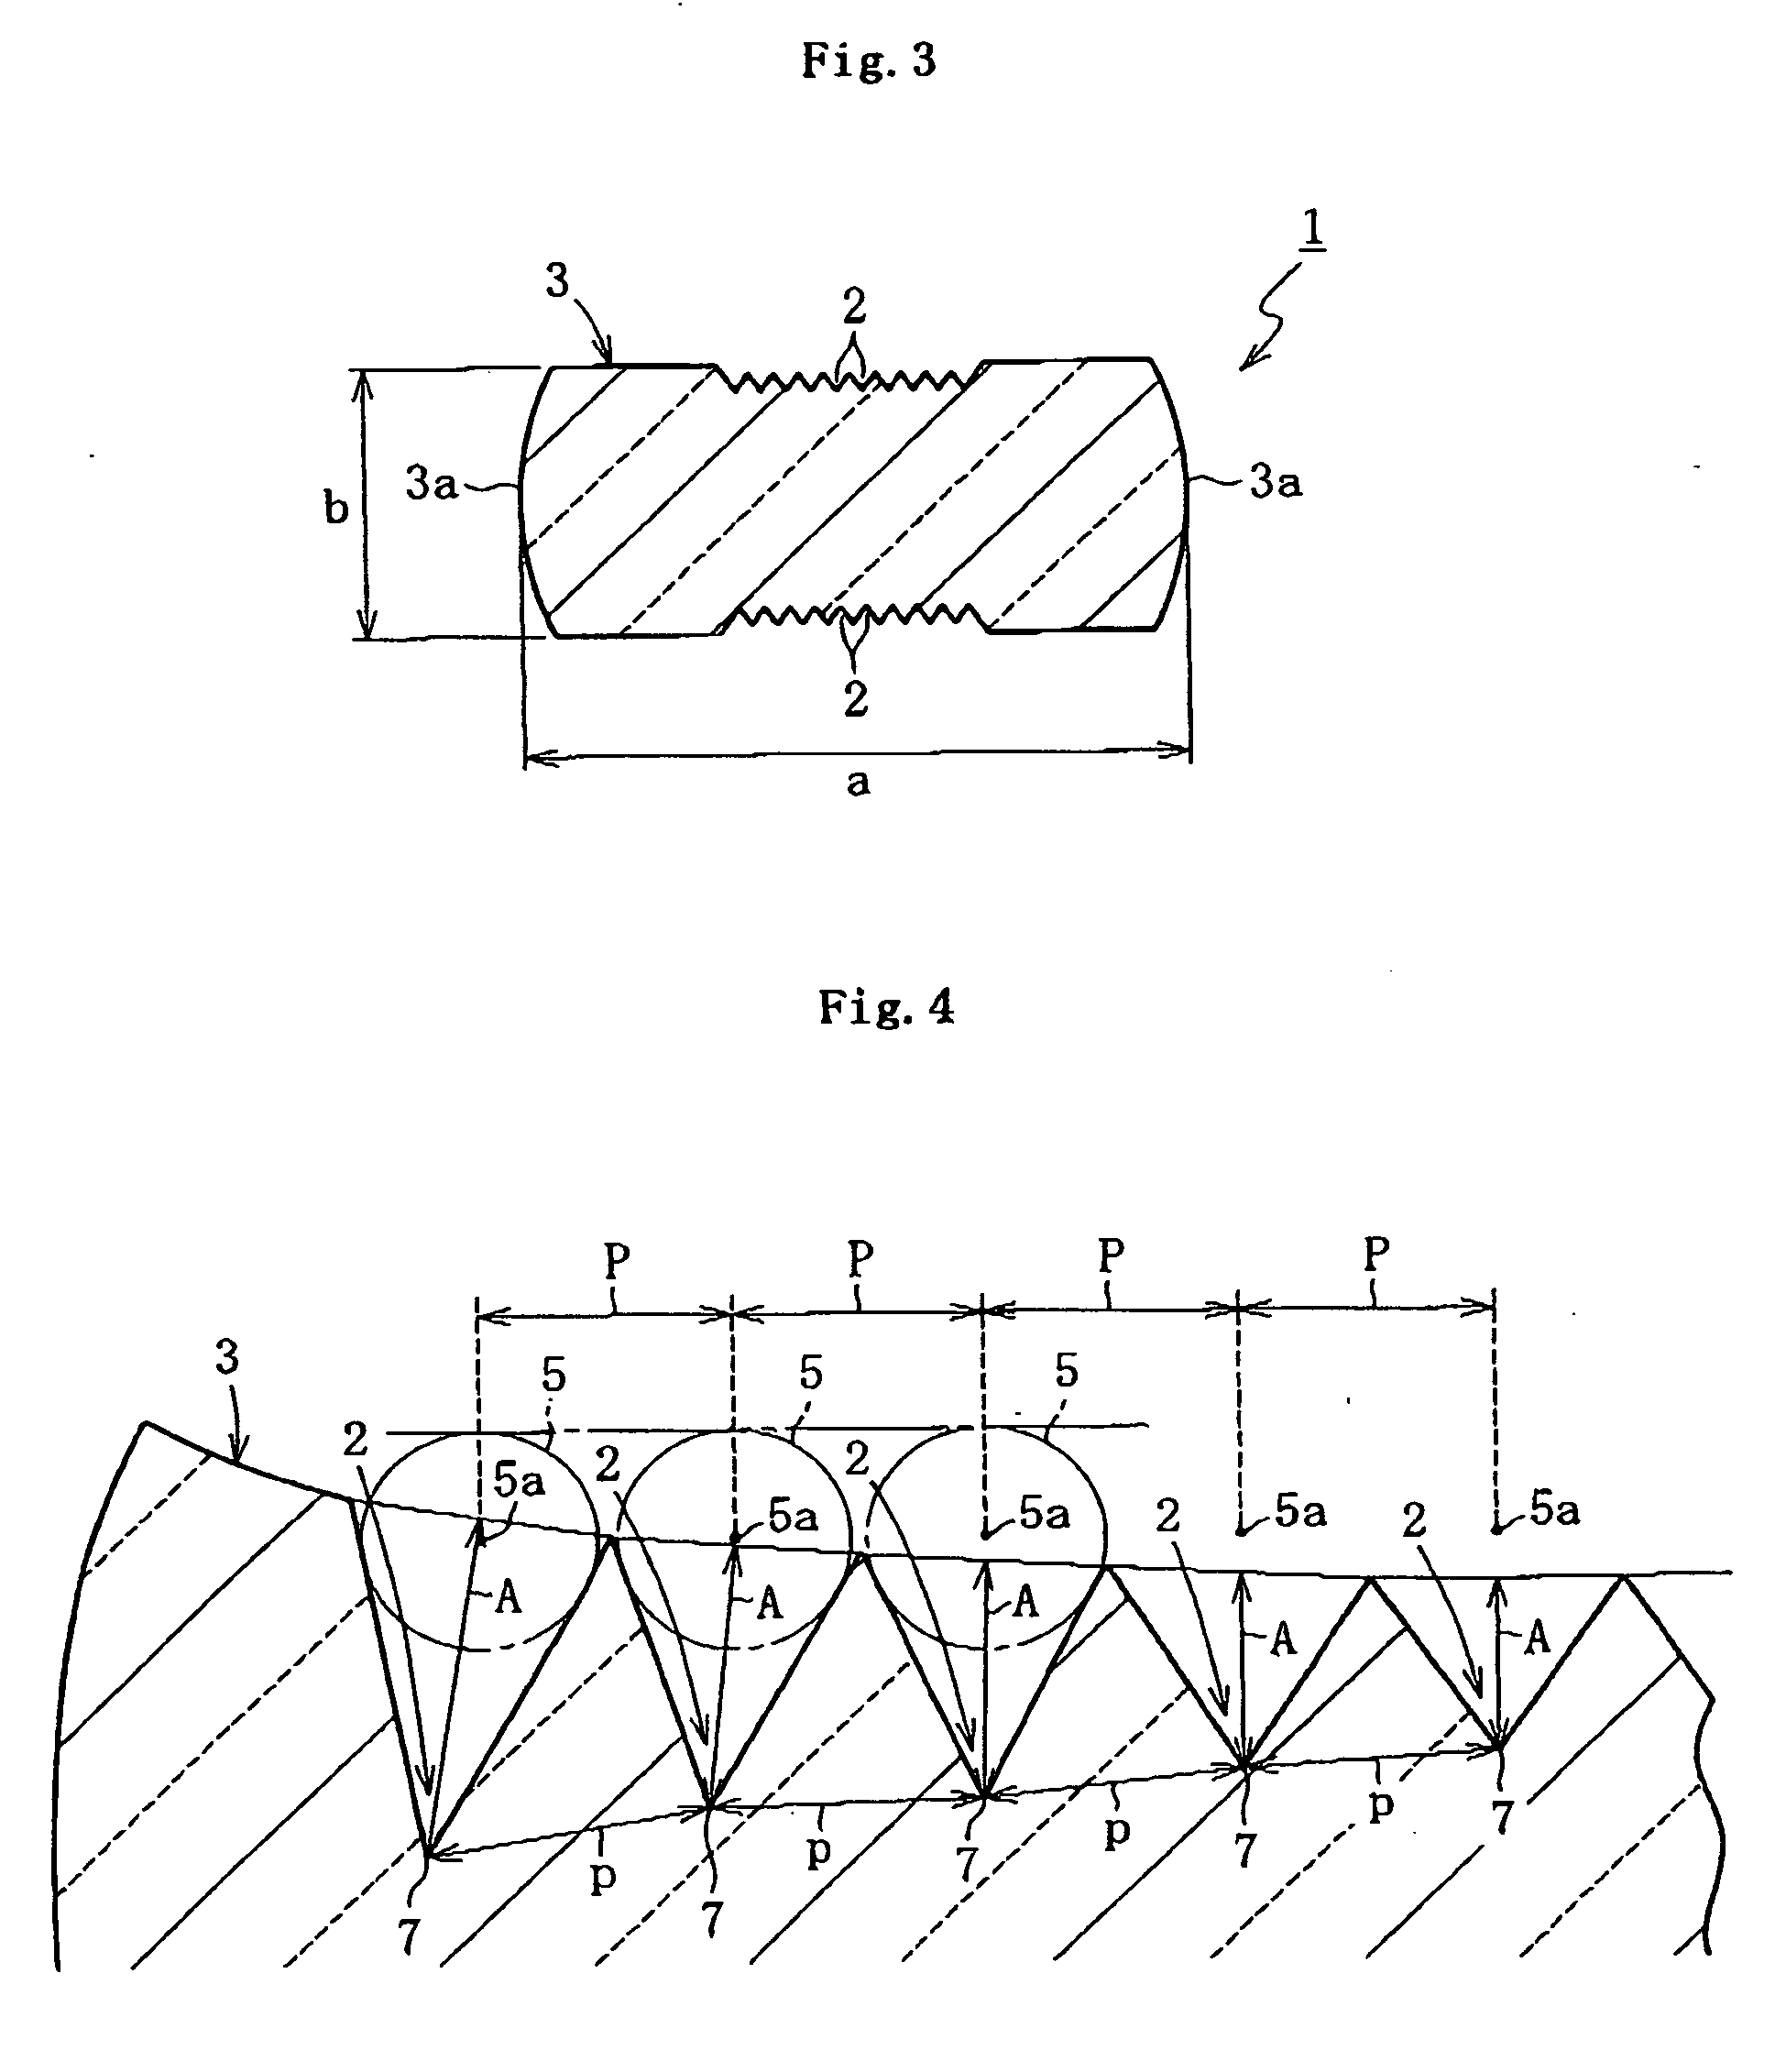 Substrate for optical fiber array and method for fabricating the same